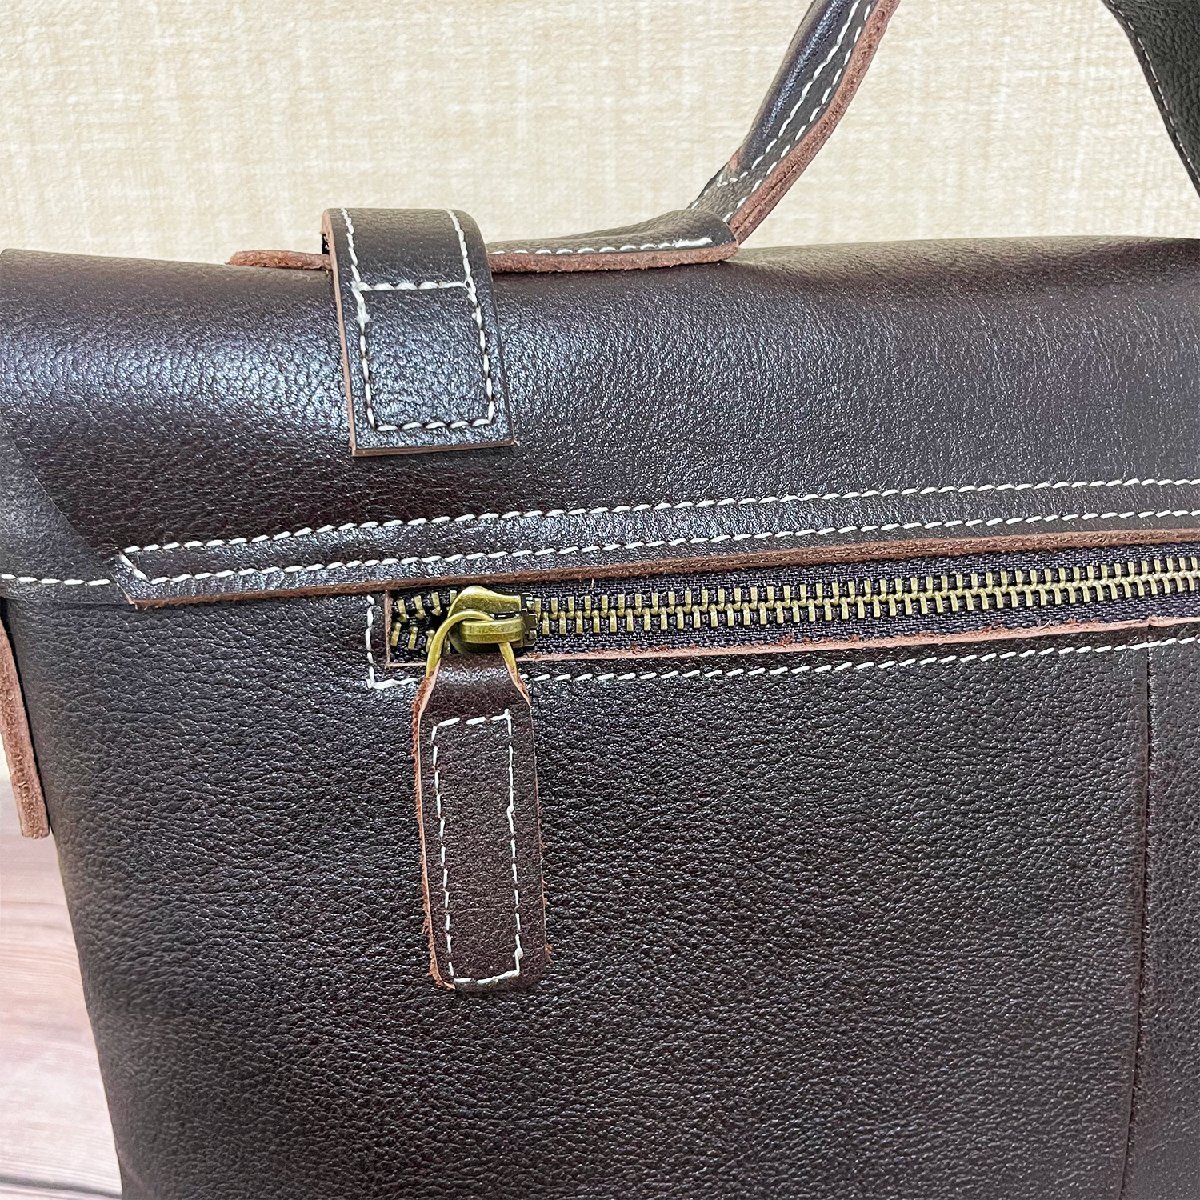  standard business bag regular price 12 ten thousand FRANKLIN MUSK* America * New York departure top class cow leather dressing up 2way tote bag formal business 